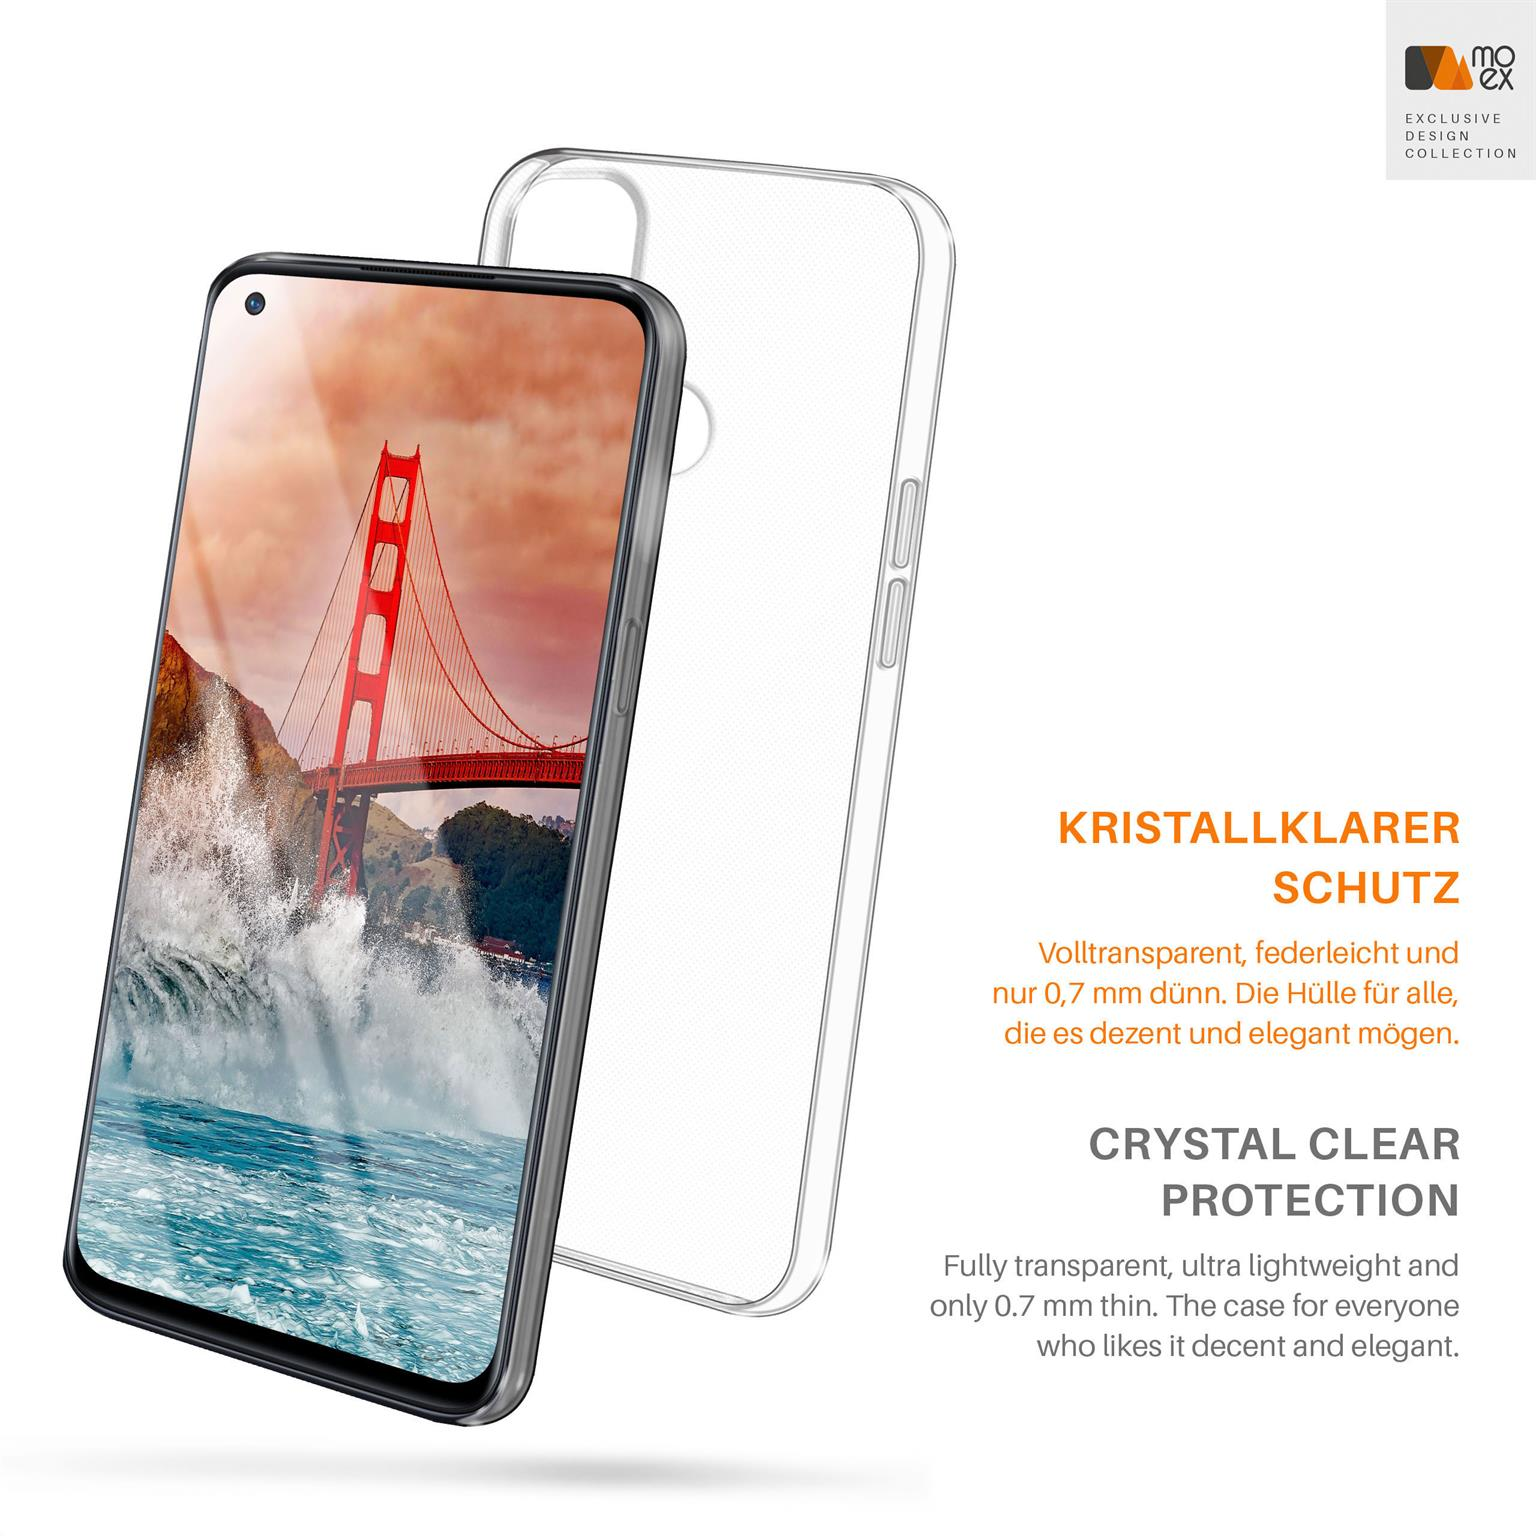 Aero Case, MOEX Backcover, Nord N100, Crystal-Clear OnePlus,